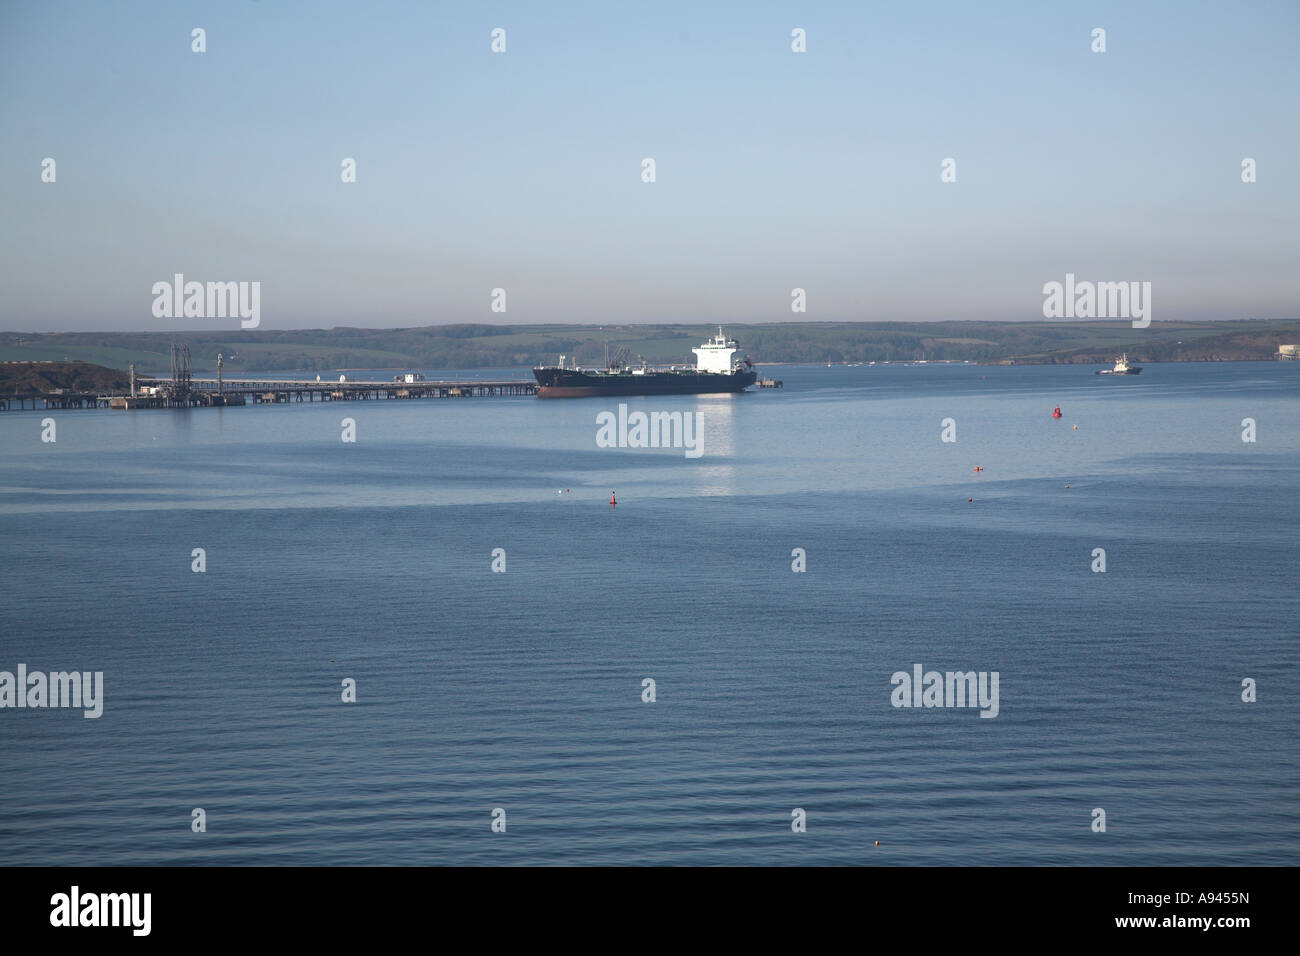 Milford Haven estuary oil terminals and ships, Pembrokeshire, Wales Stock Photo